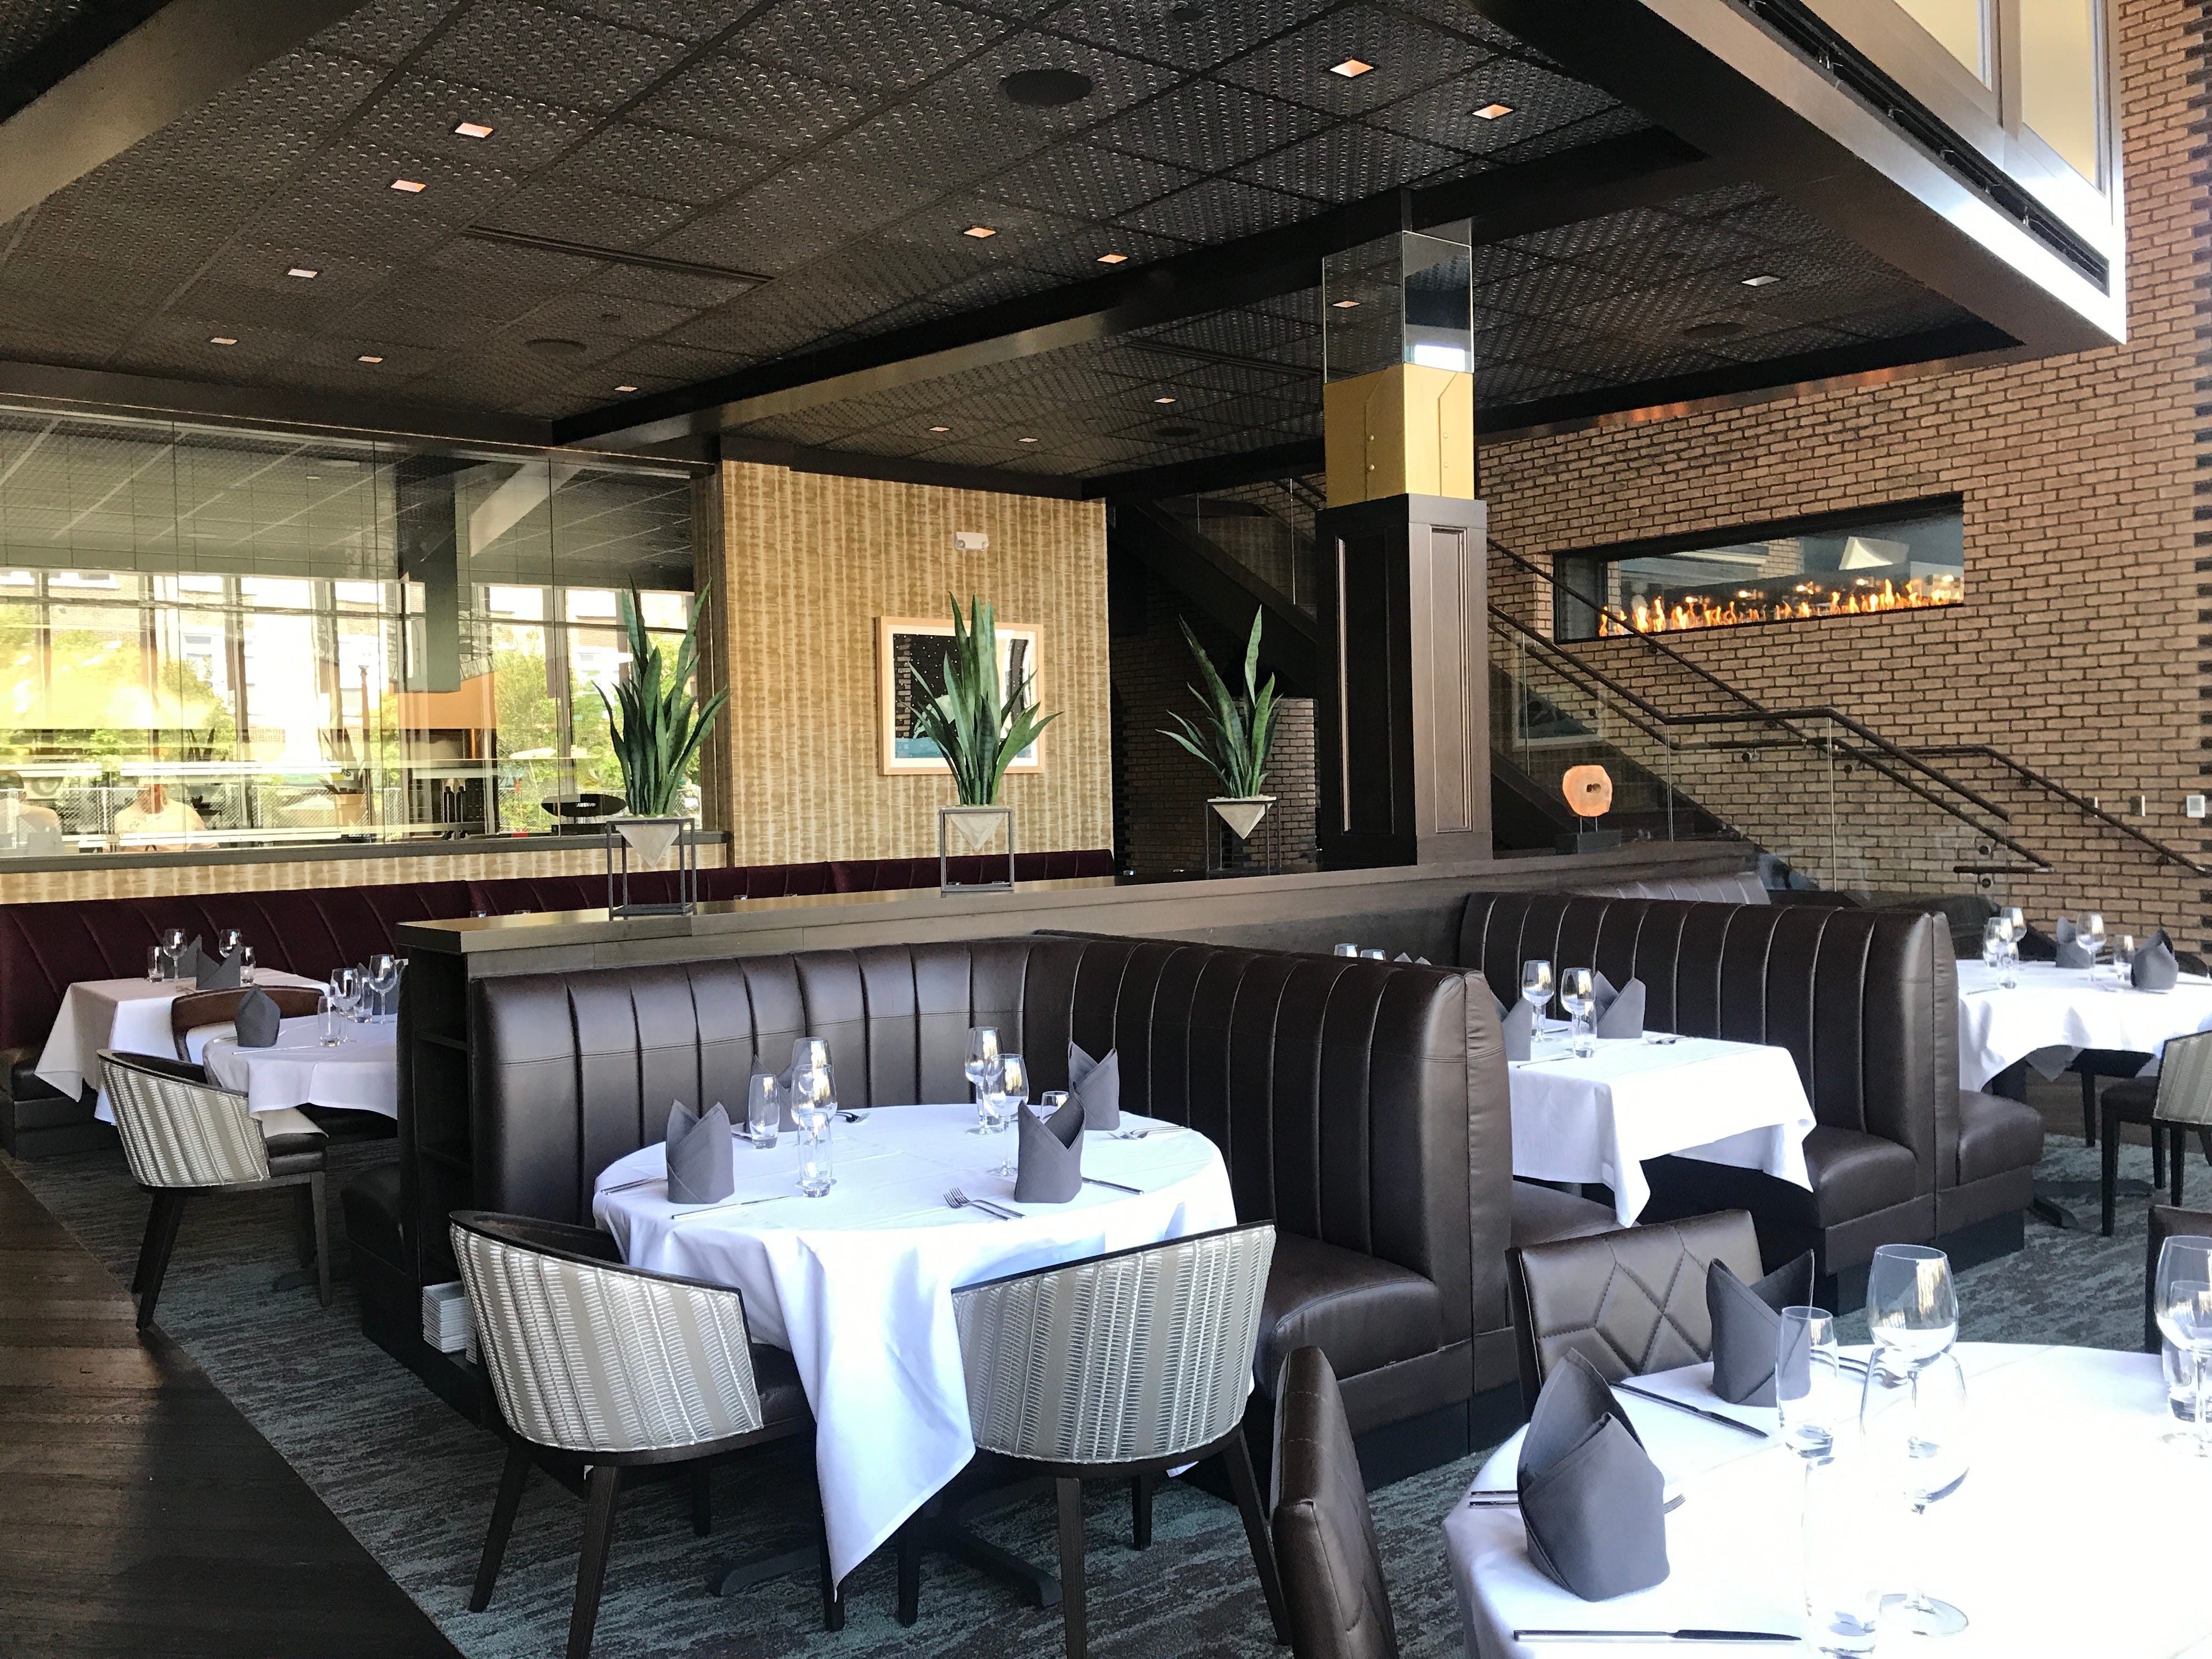 Anthony's Chophouse brings a swanky steakhouse experience to Carmel